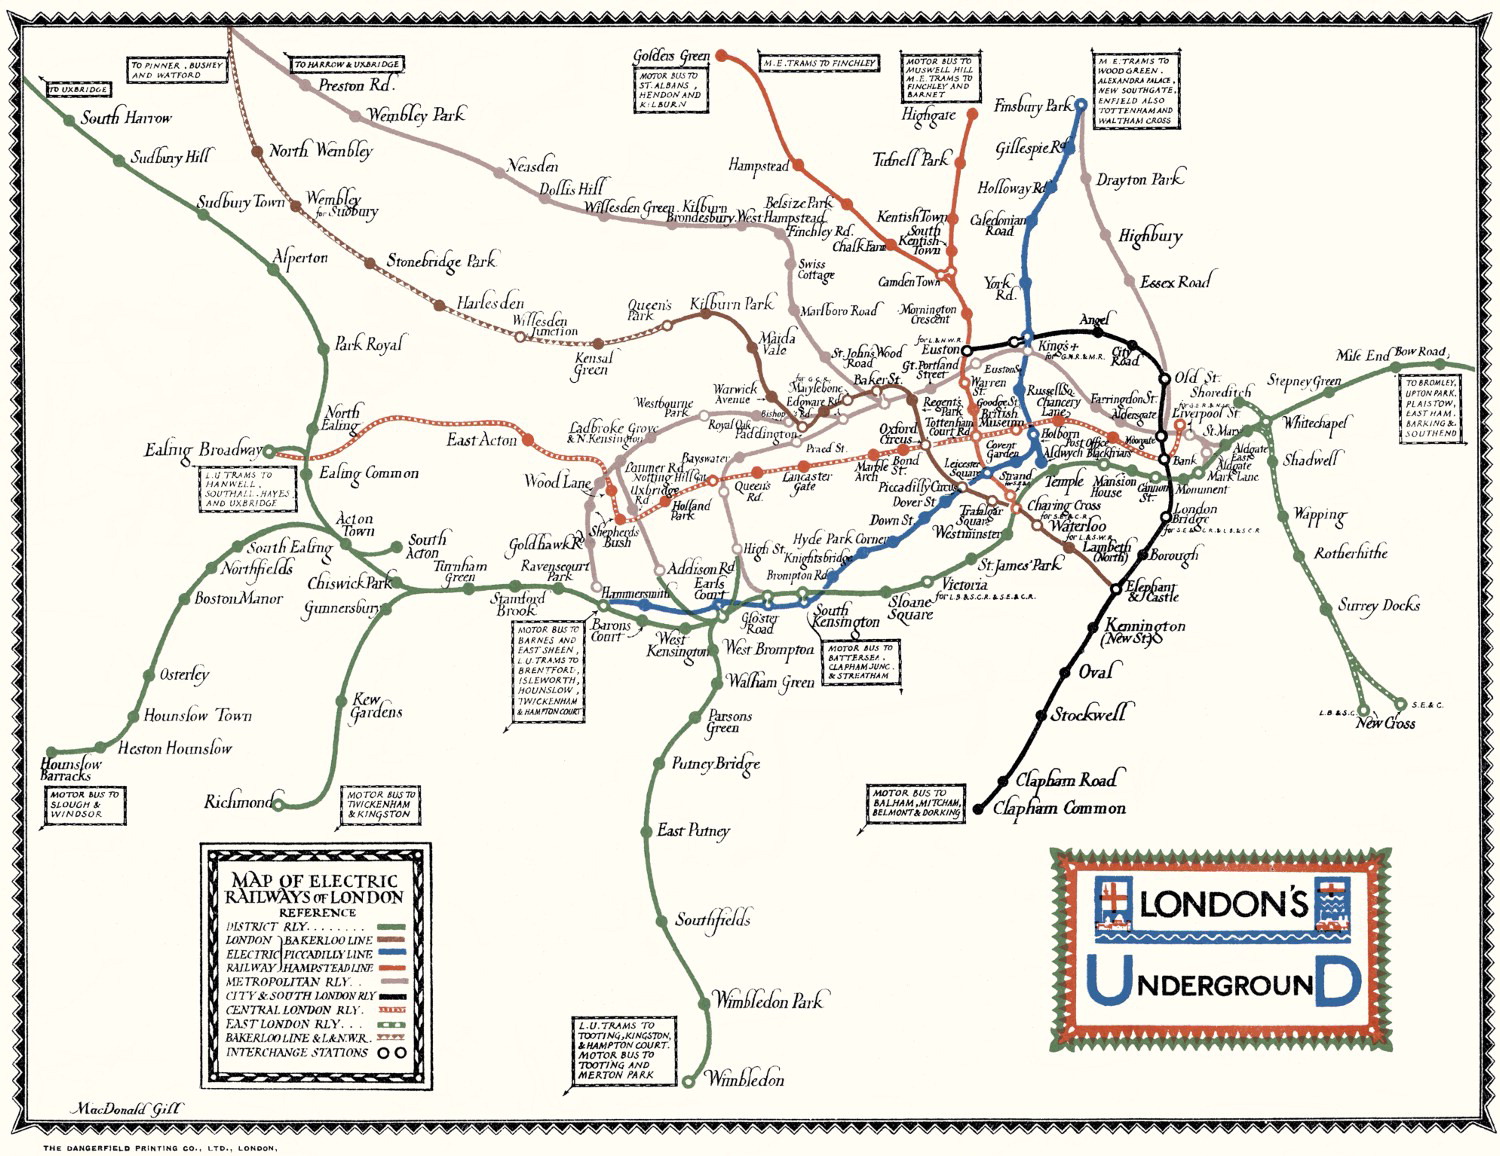 1922 London Underground map by Macdonald Gill. This map removed surface detail to focus on the transit lines.